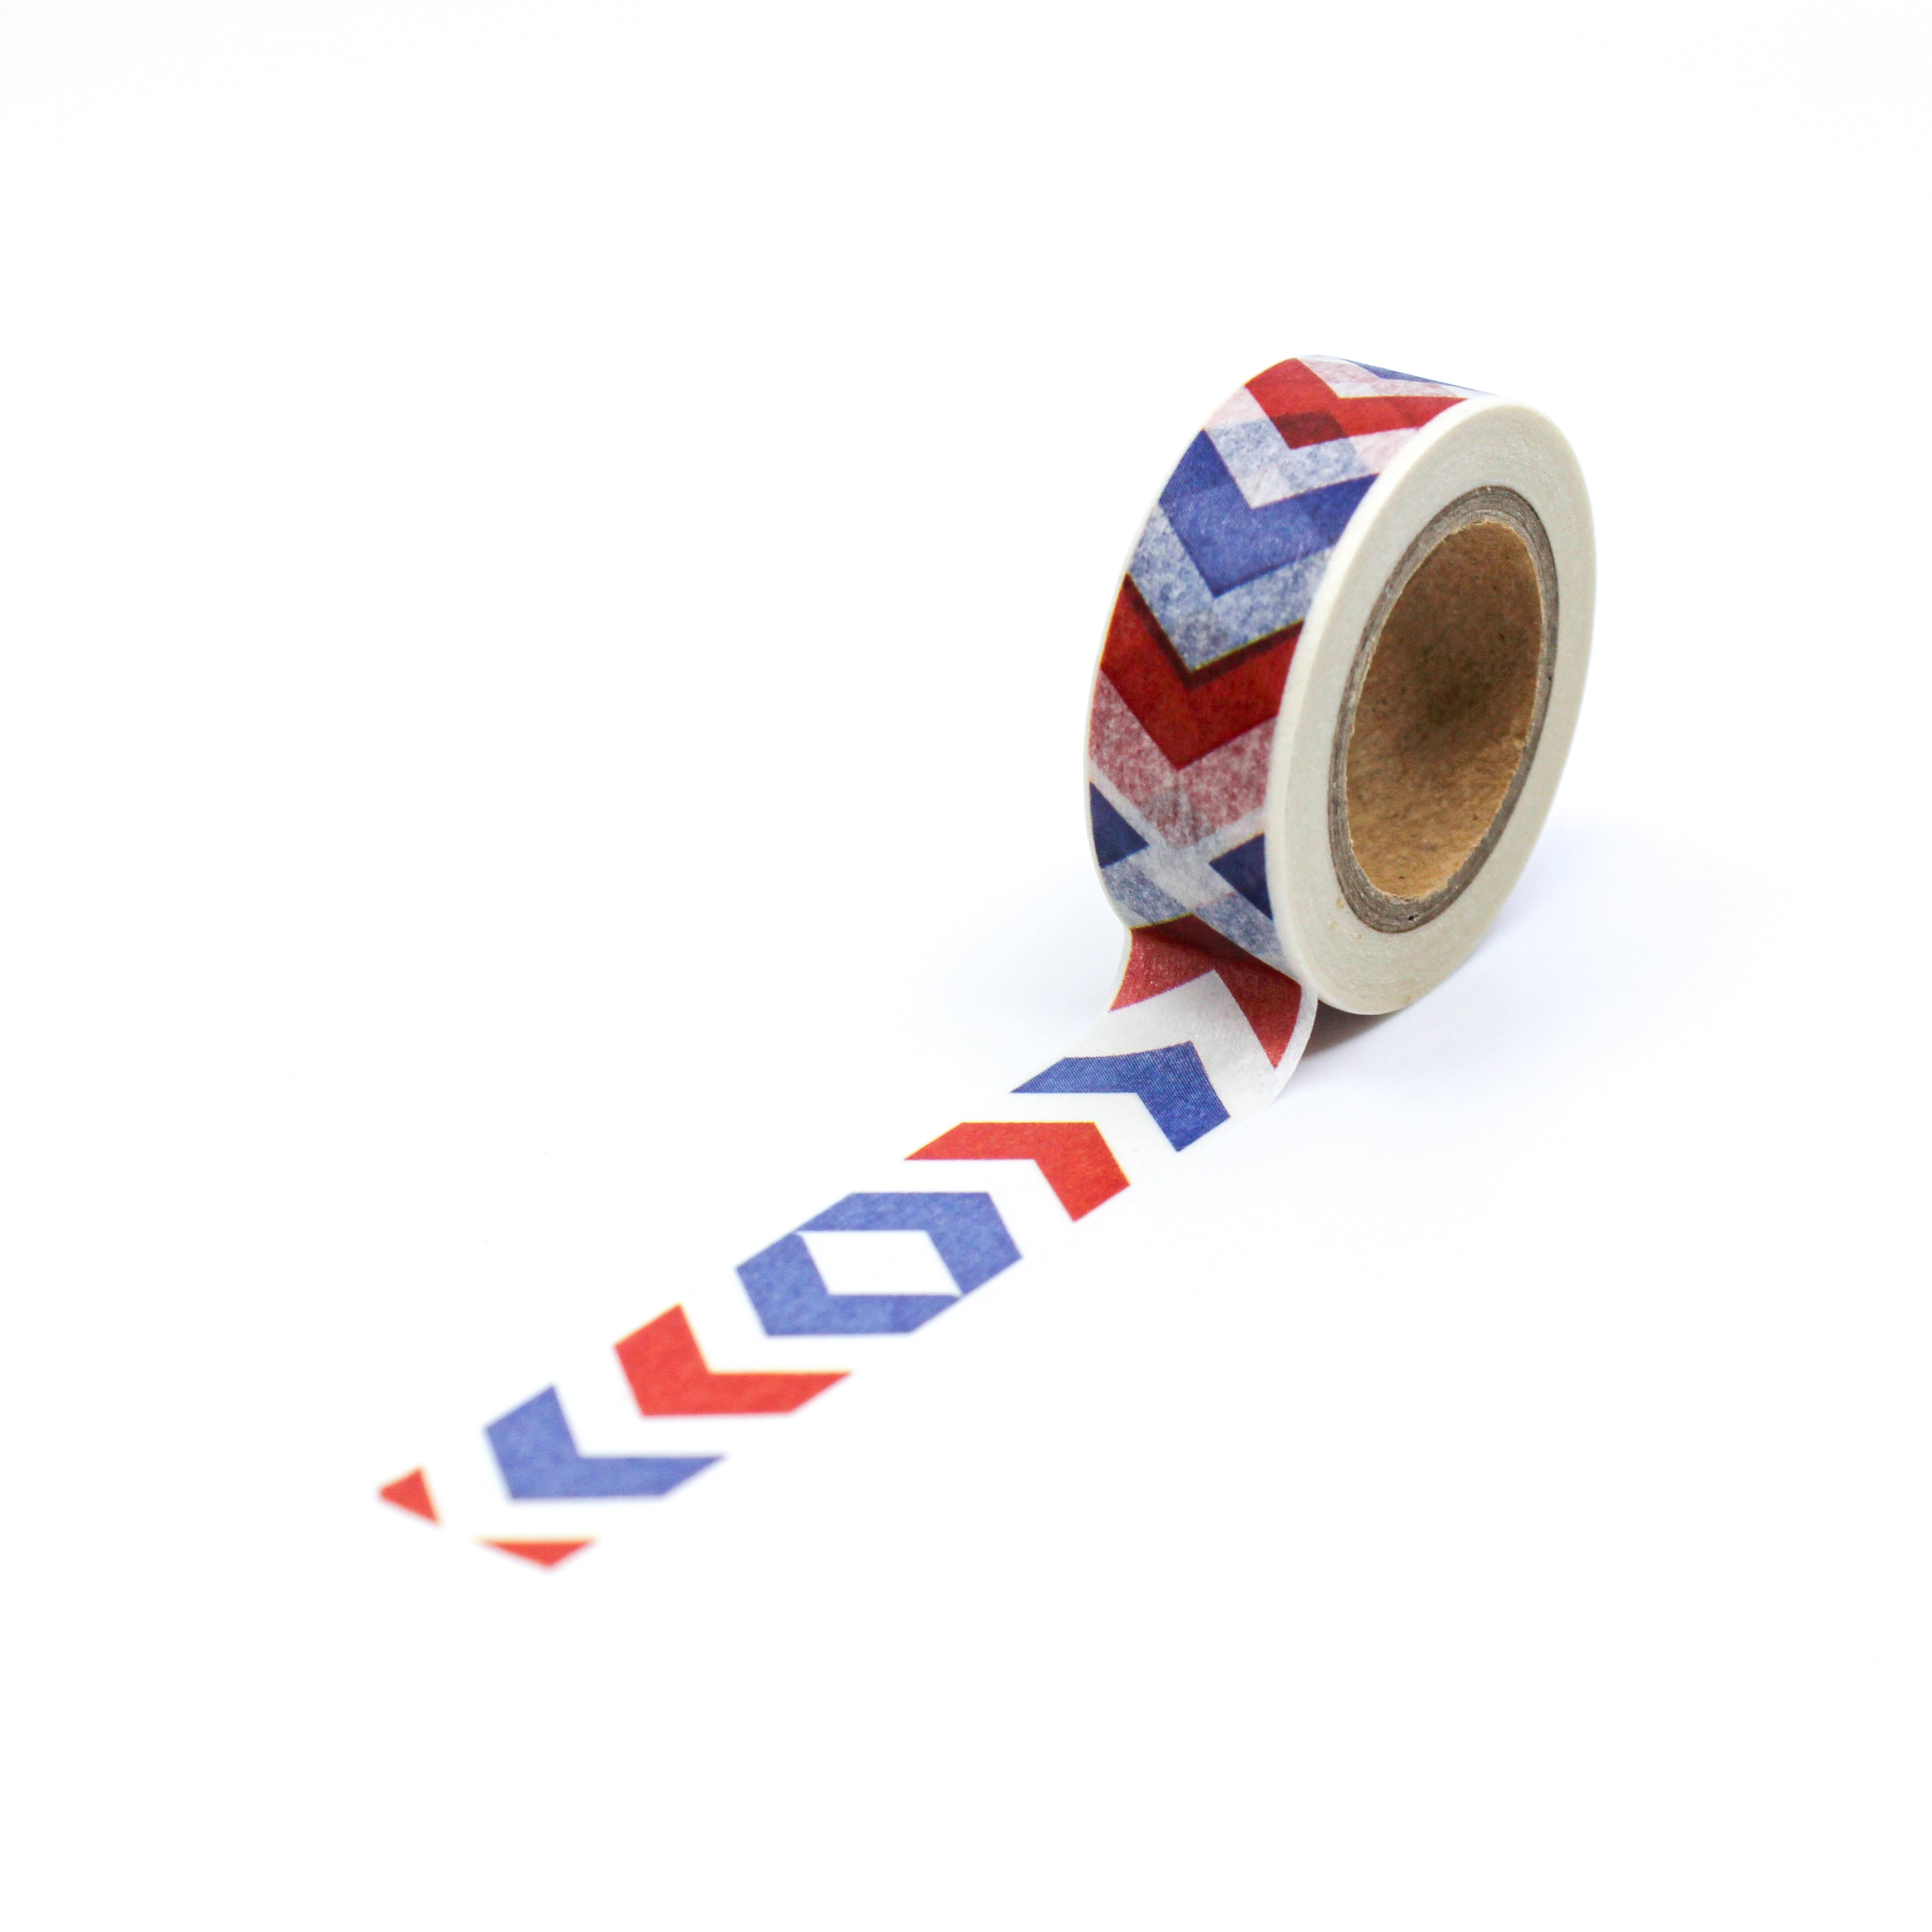 This is a full pattern repeat view of red and blue military chevron pattern Washi Tape from BBB Supplies Craft Shop